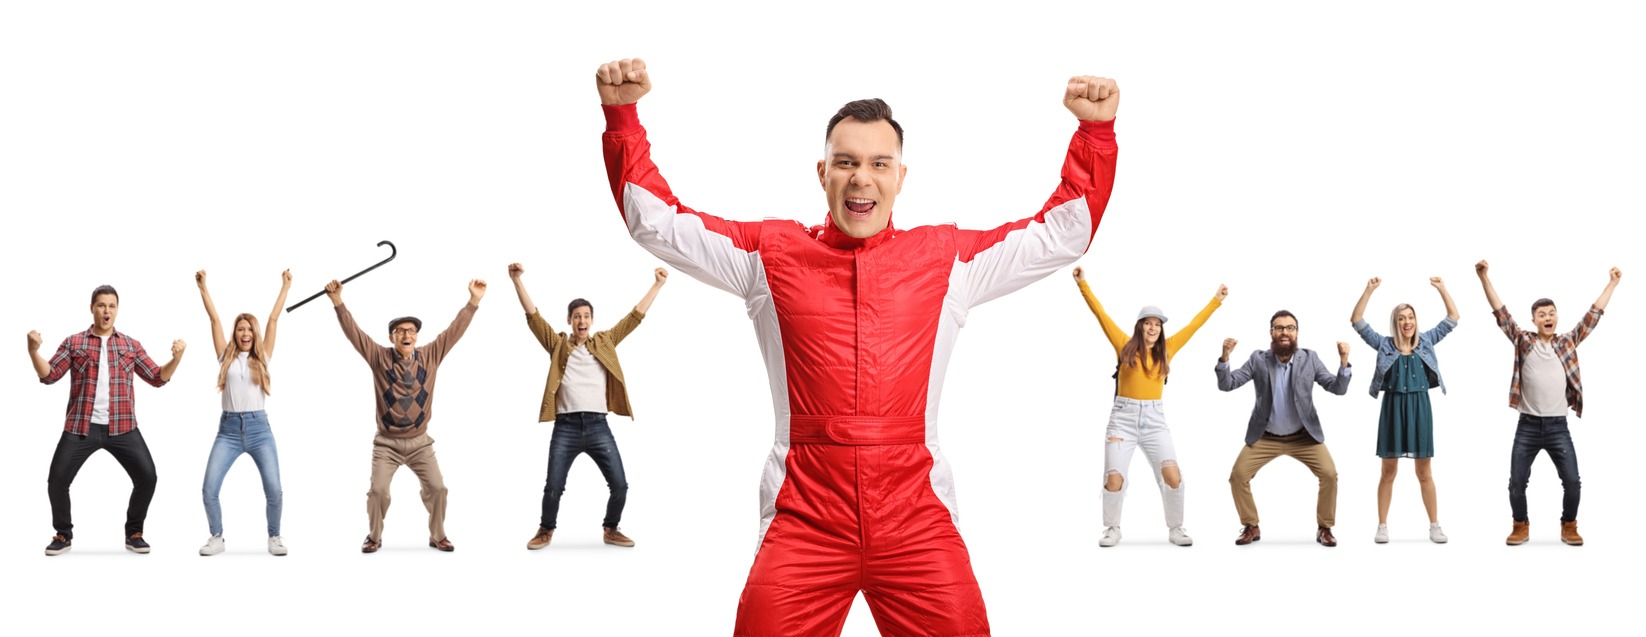 a racer celebrating with other people raising arms on the background